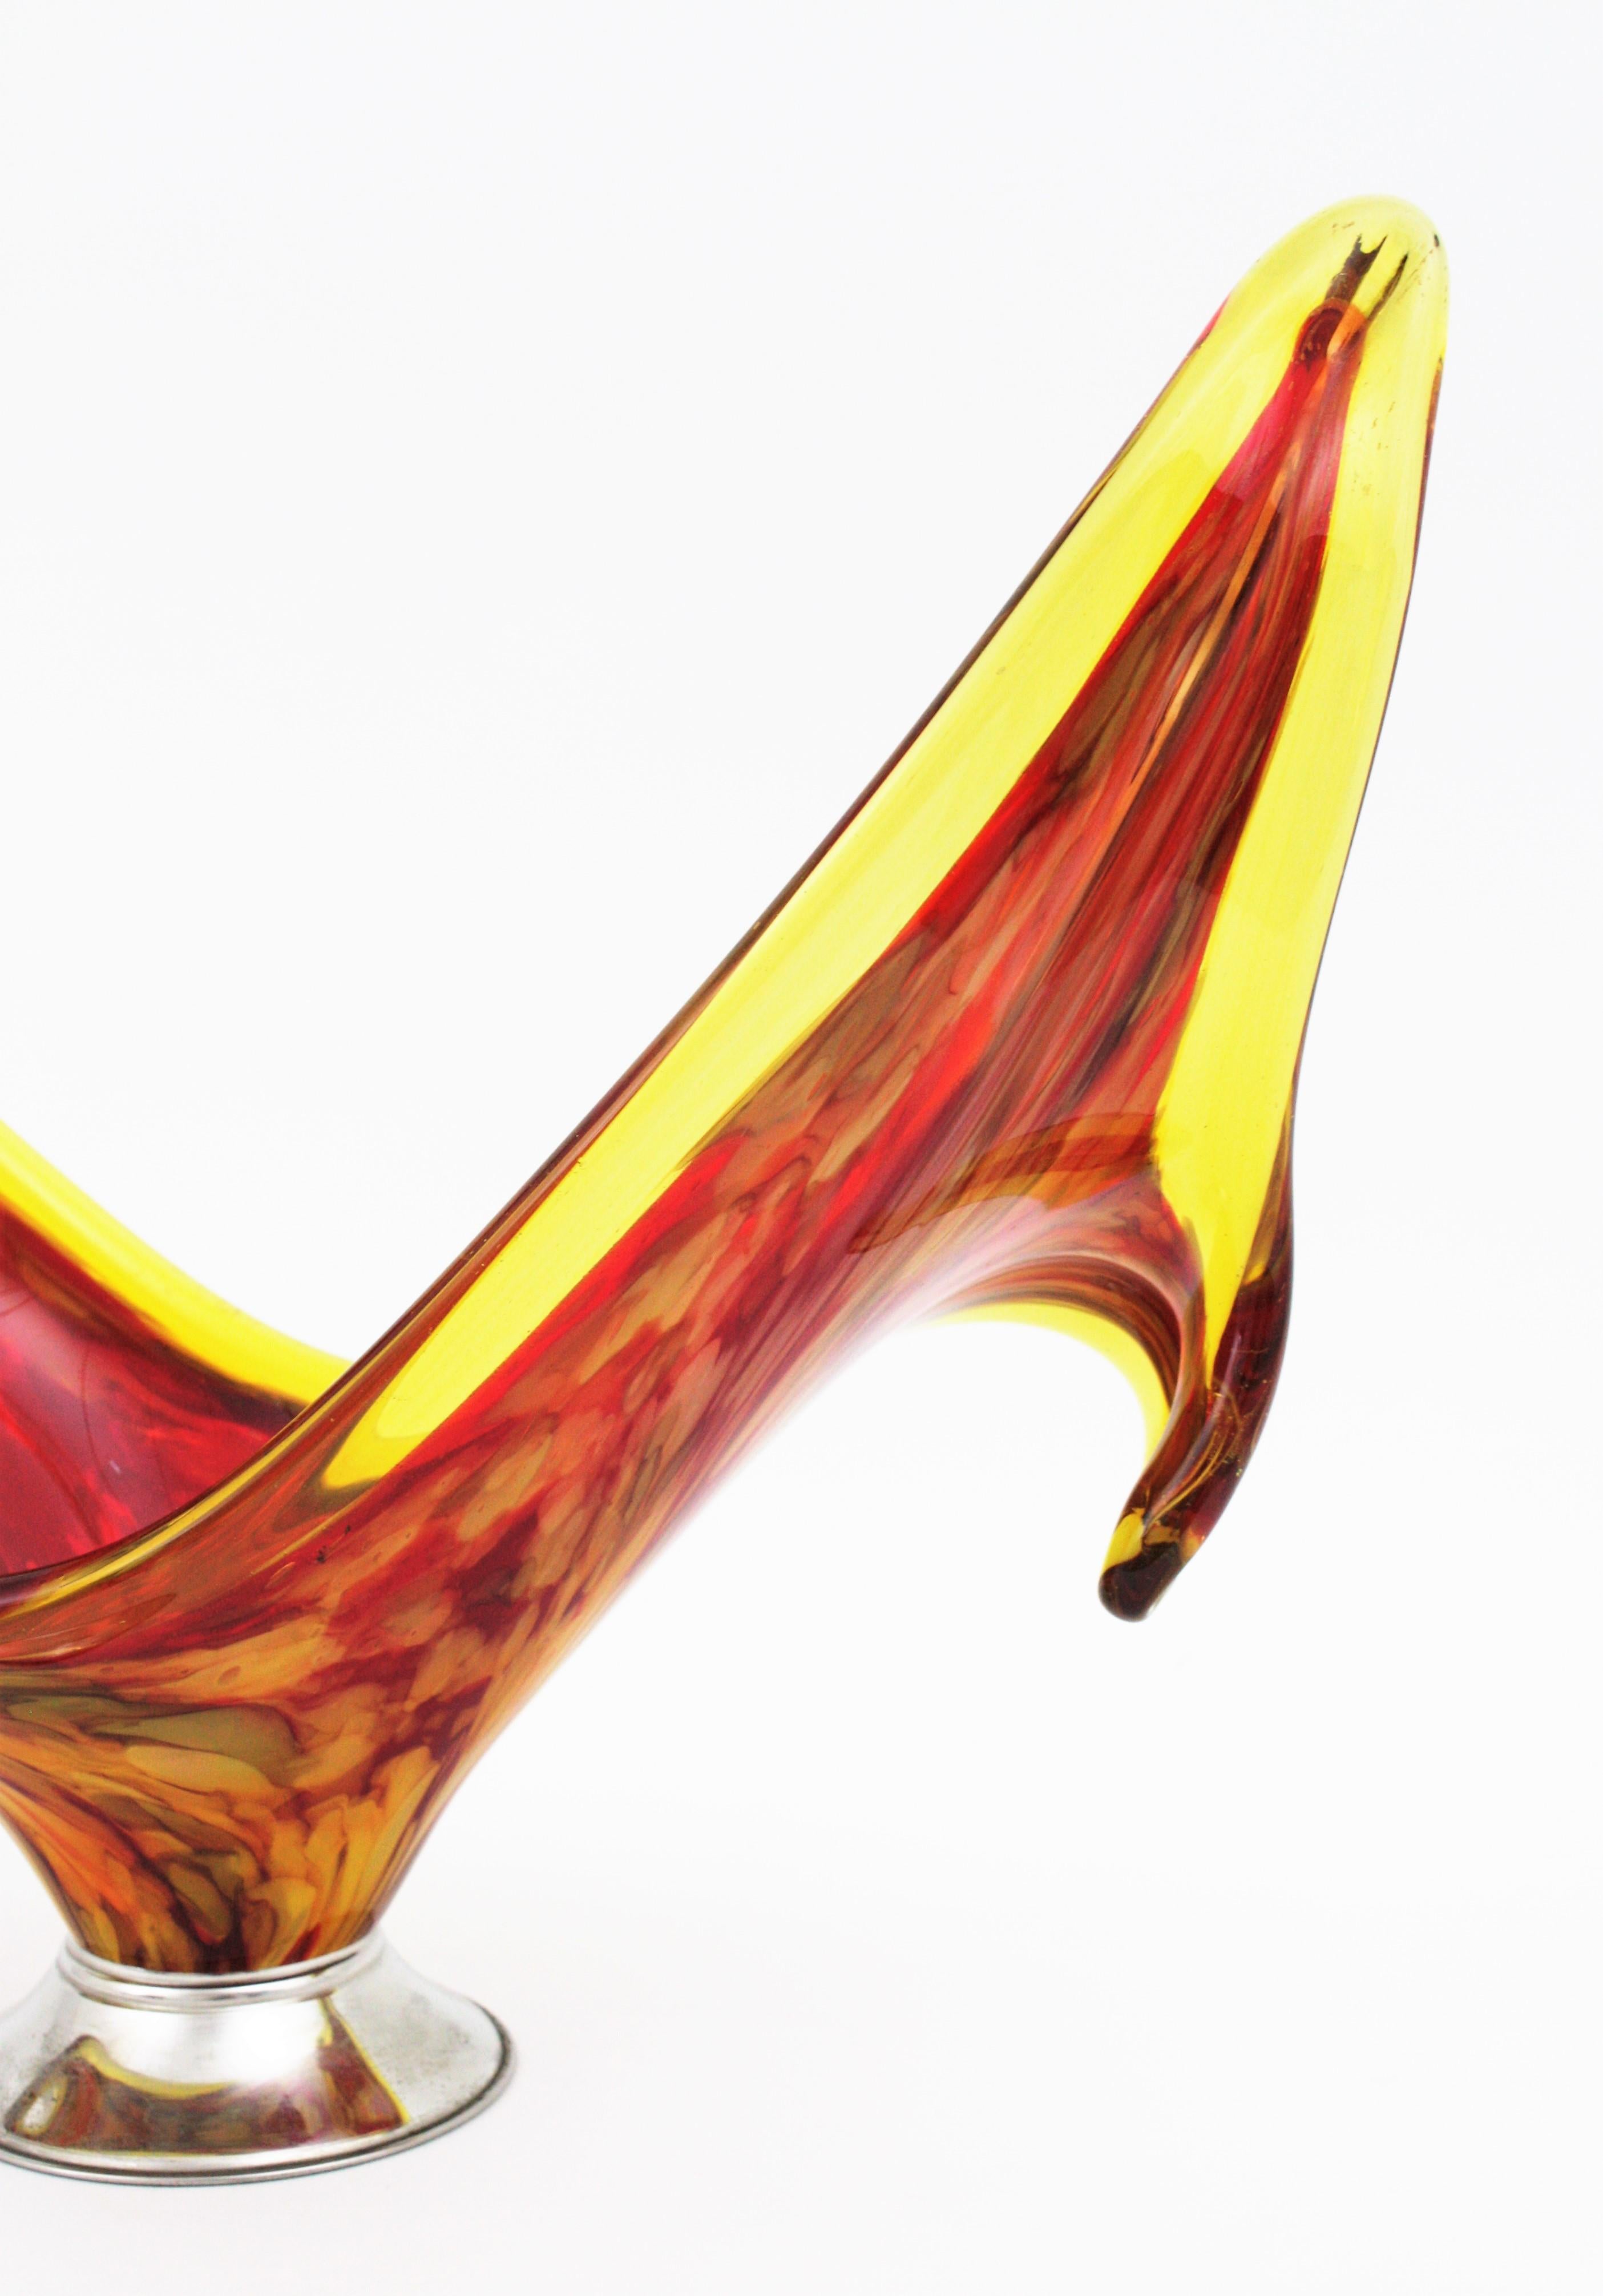 Art Glass Italian Modernist Murano Red and Yellow Glass Centerpiece Vase with Chromed Base